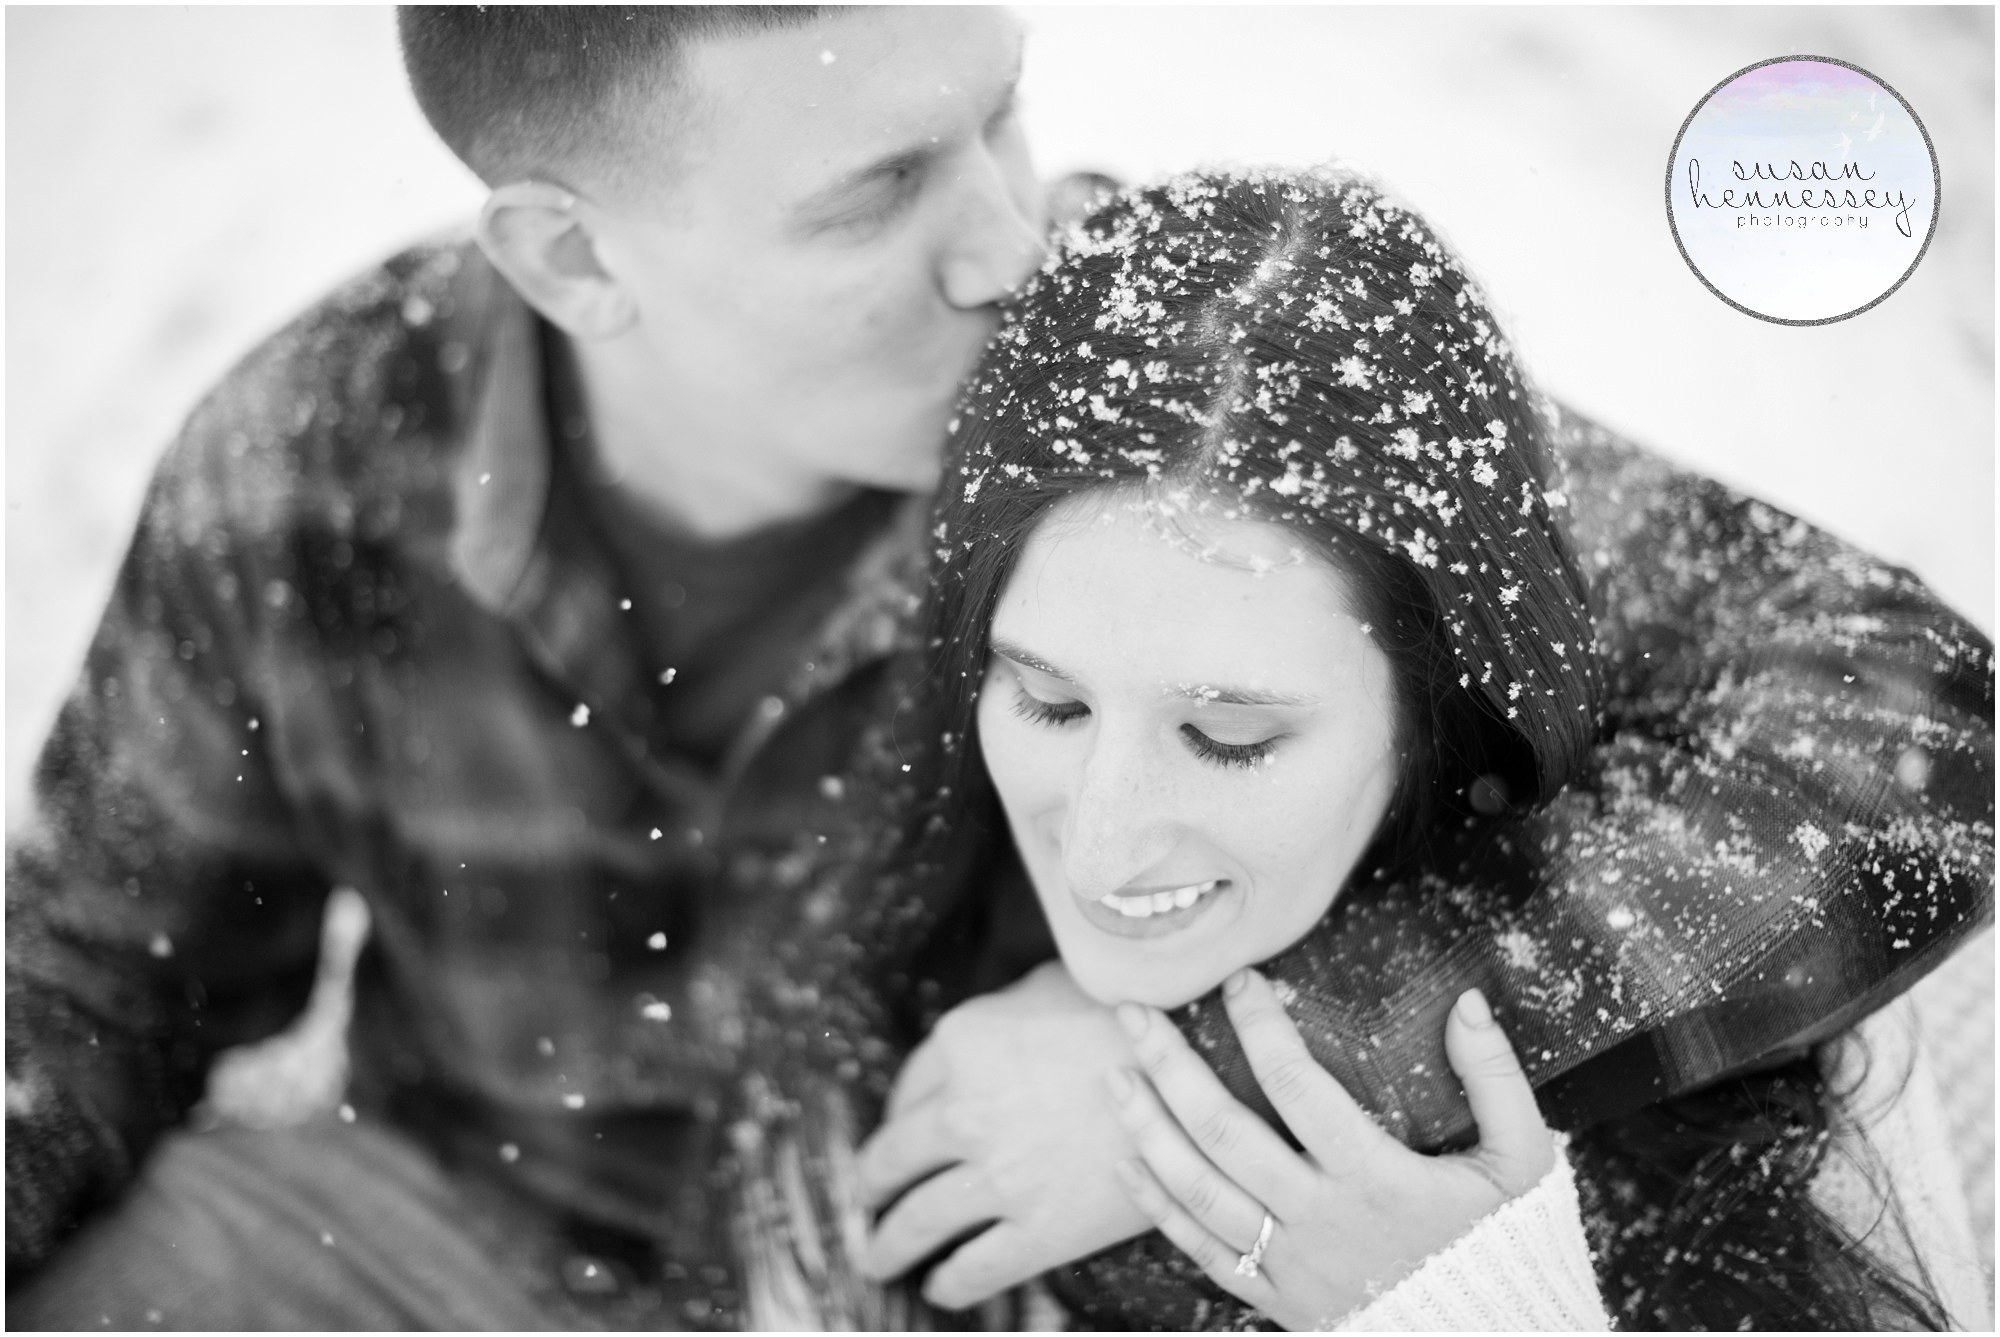 The snow fall at Stacy and Mike's engagement session created stunning and dramatic portraits!